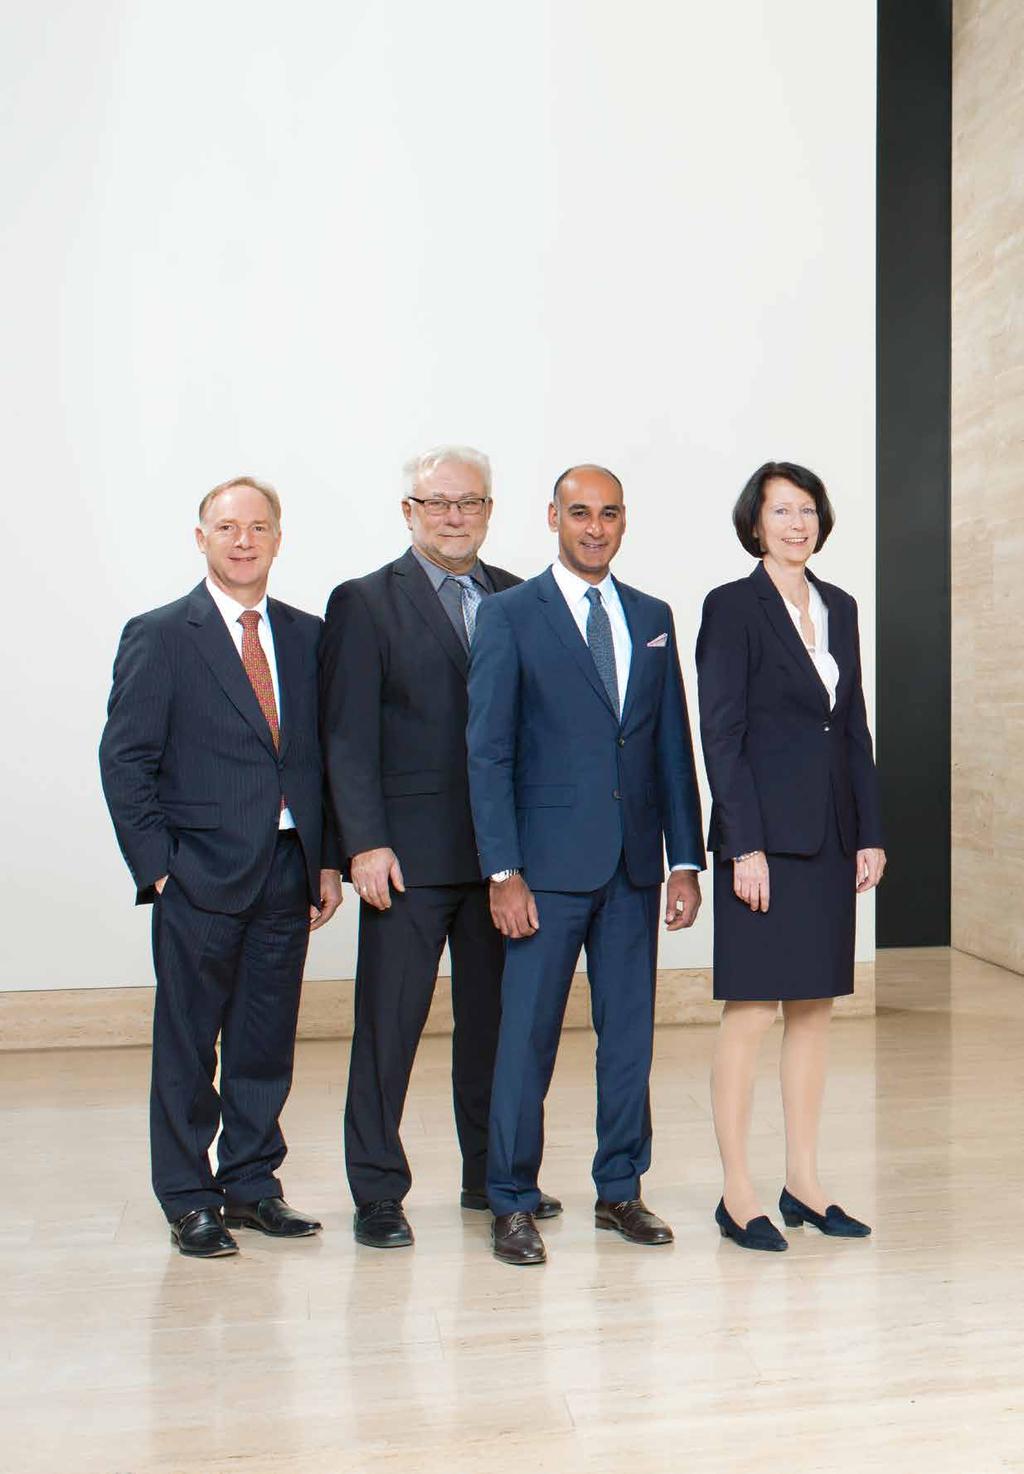 DVB BANK SE GROUP ANNUAL REPORT 2016 SUPERVISORY BOARD From left to right IVO MONHEMIUS MARTIN WOLFERT ADNAN MOHAMMED ULRIKE DONATH FRANK WESTHOFF